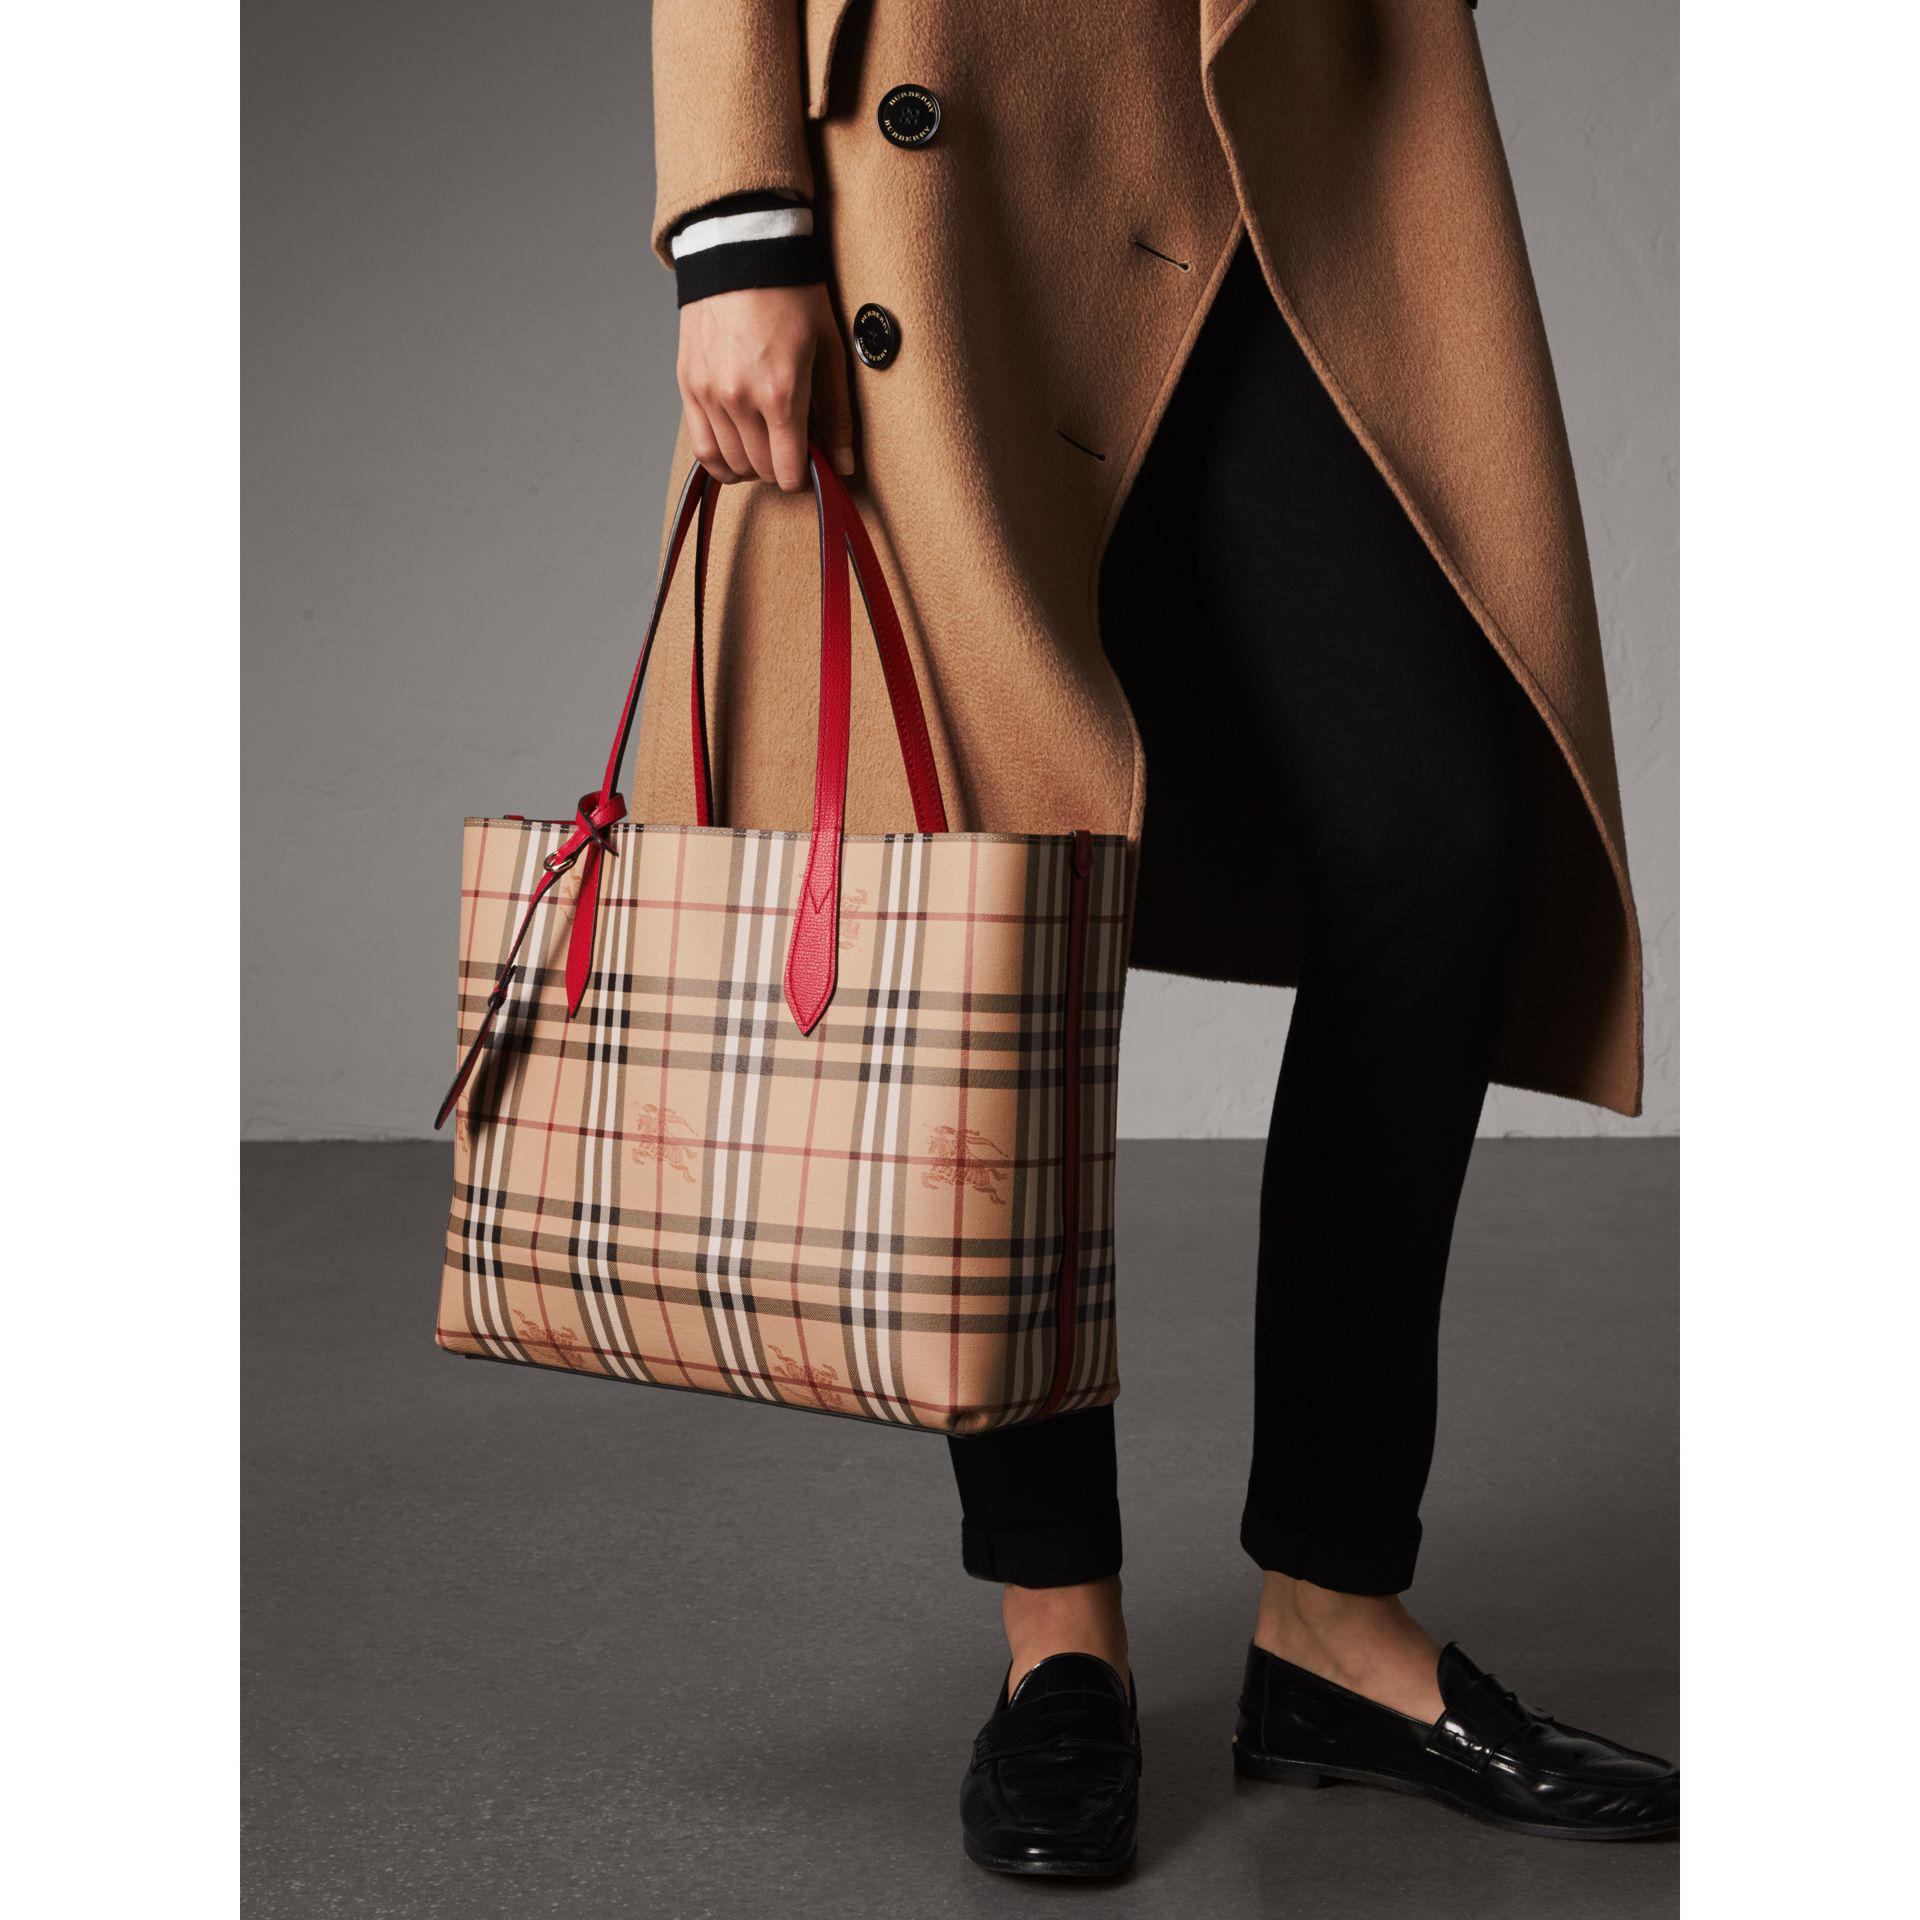 Burberry Reversible Tote bag Canvas Check Red/Brown Tote